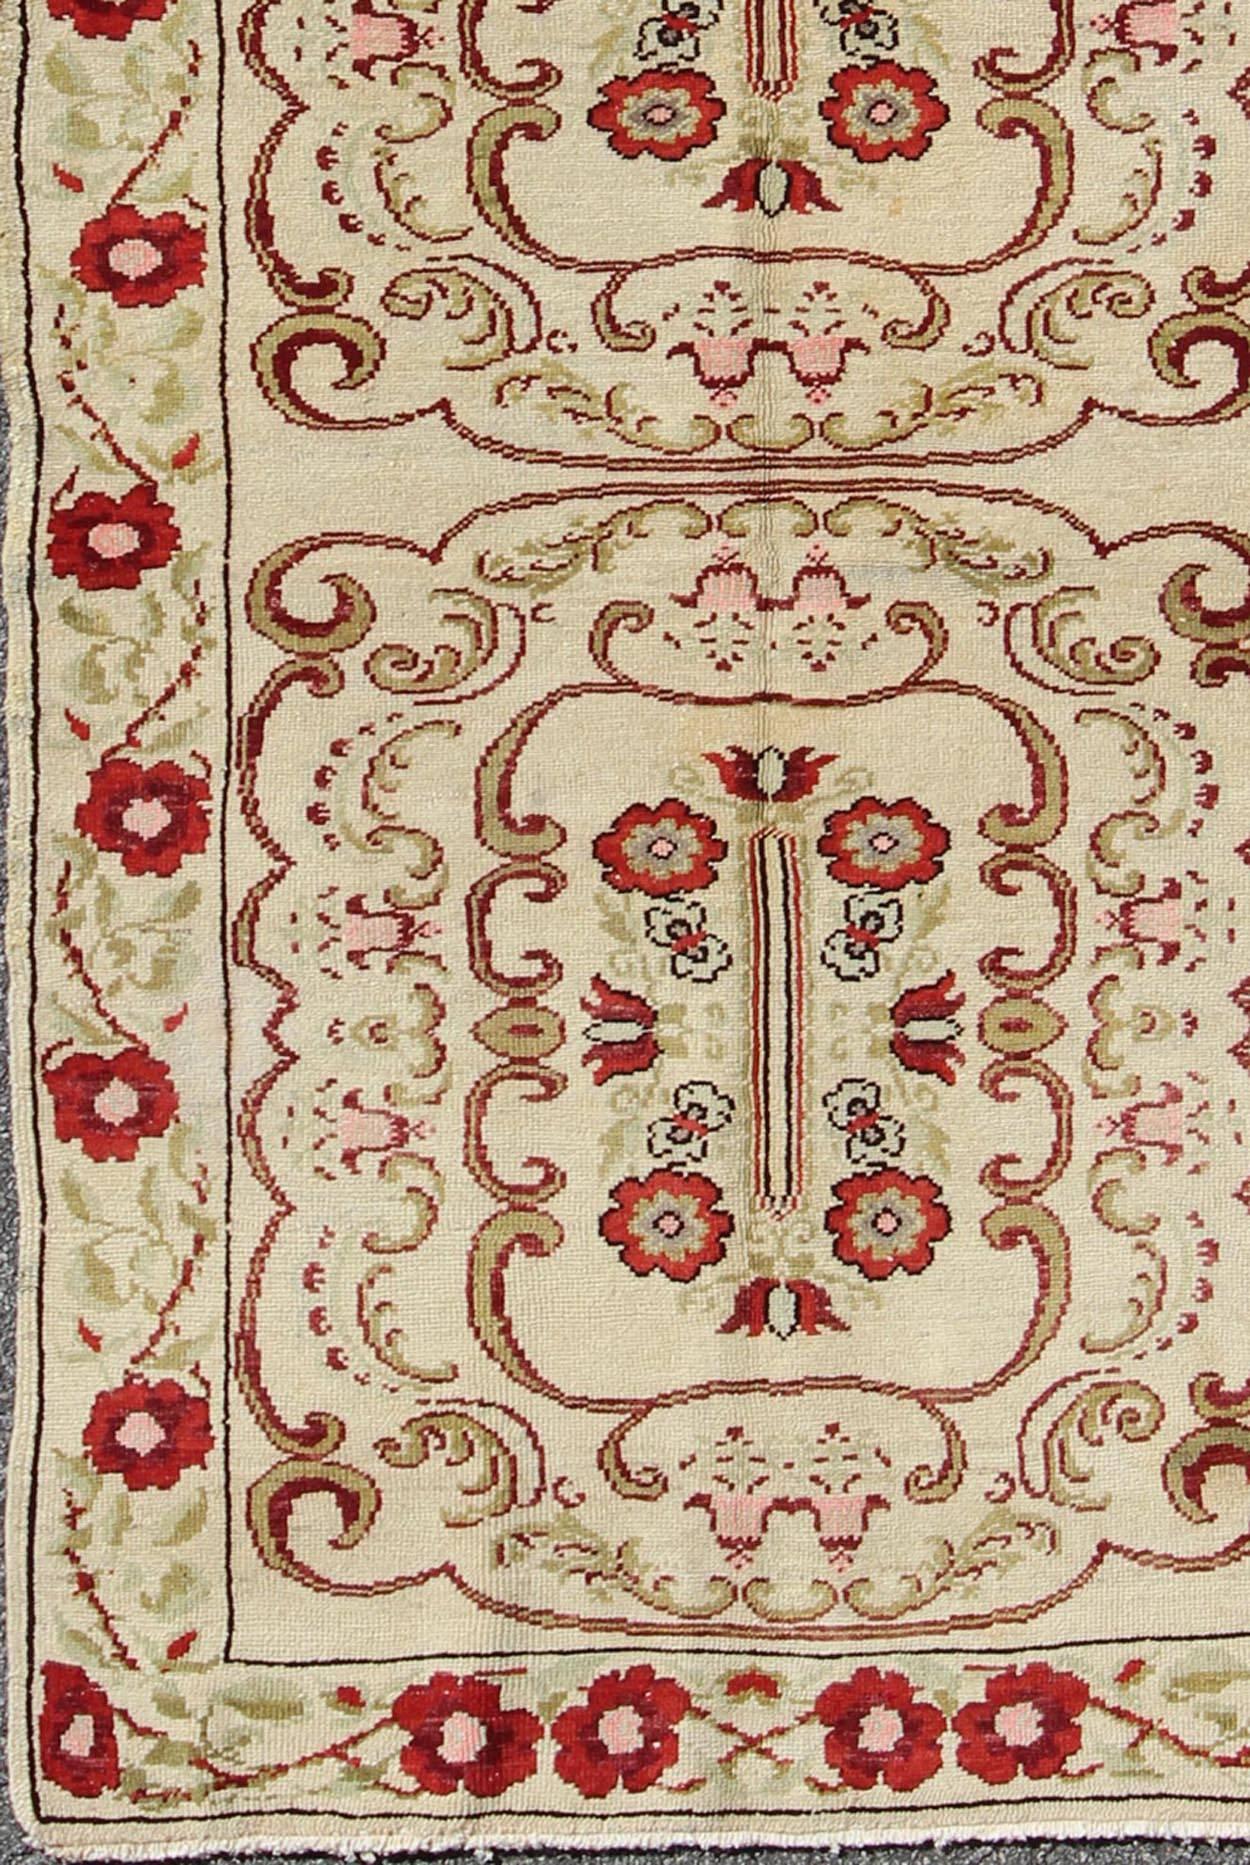 Vintage Turkish Oushak Gallery runner in Art Deco design and floral pattern. Keivan Woven Arts / rug TU-YUN-136072, Turkey / Oushak, circa mid-20th Century.

This beautiful Turkish runner features a stylized Art Deco design with pronounce